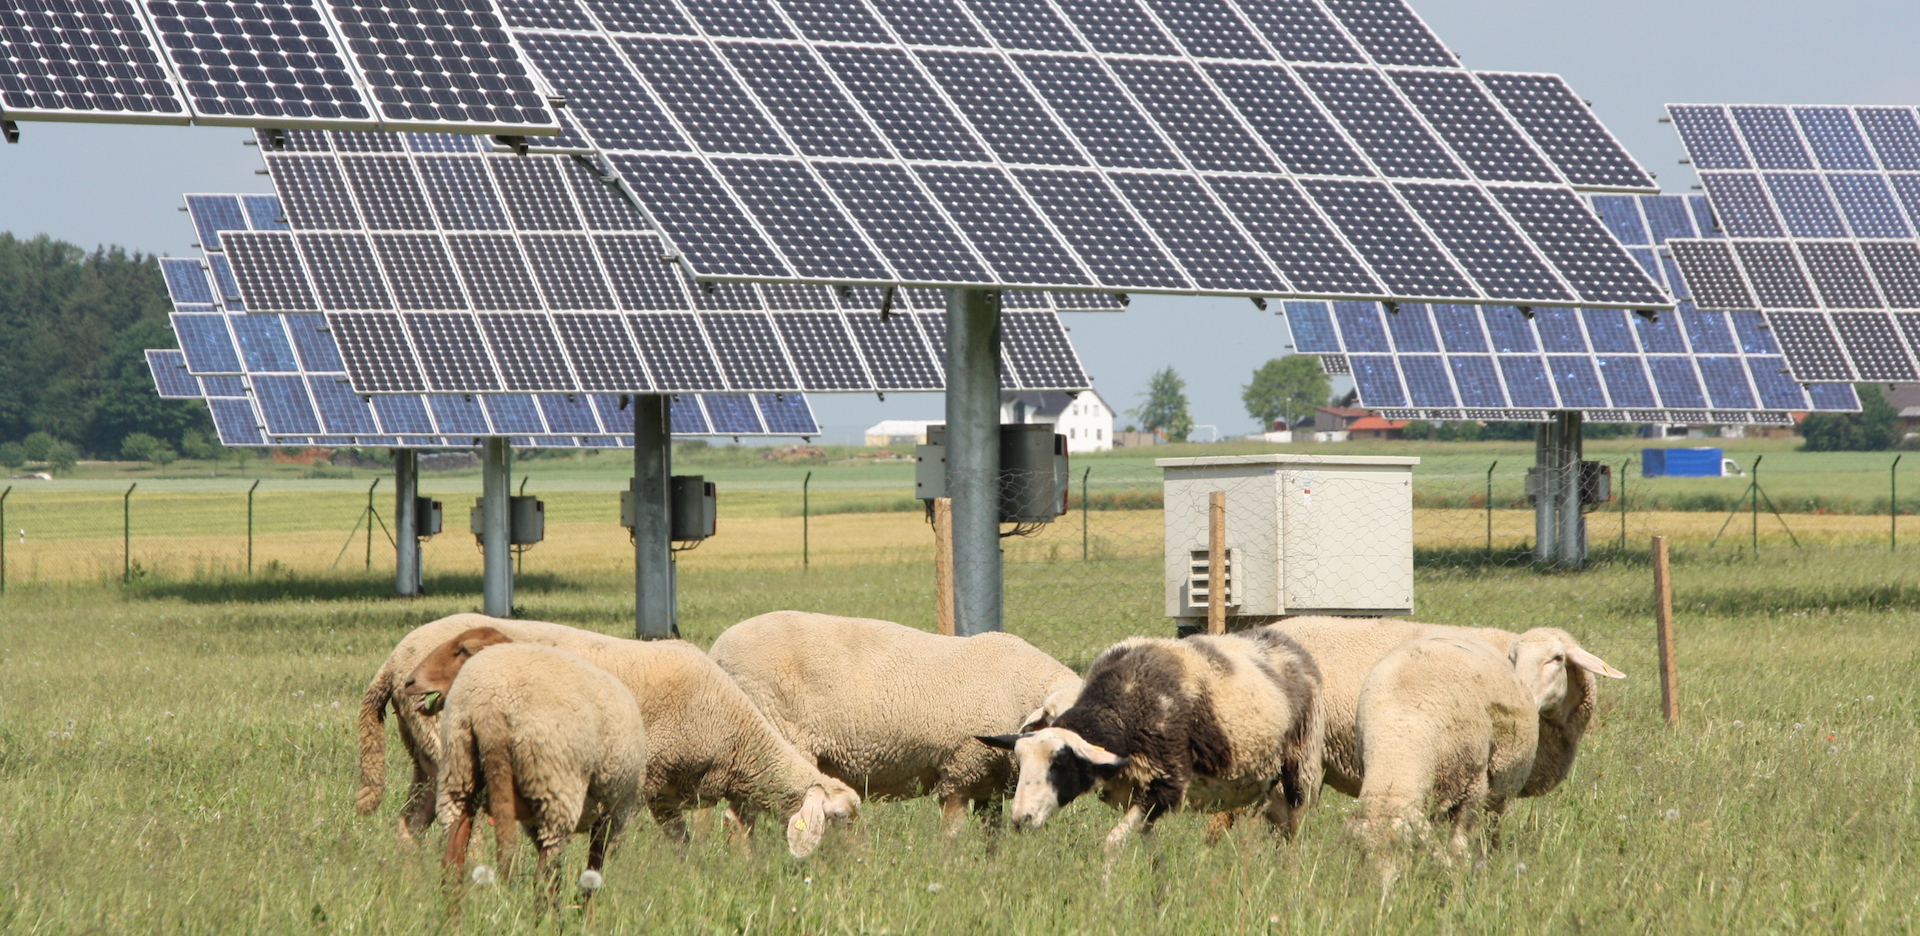 Sheep graze in a meadow with solar panels